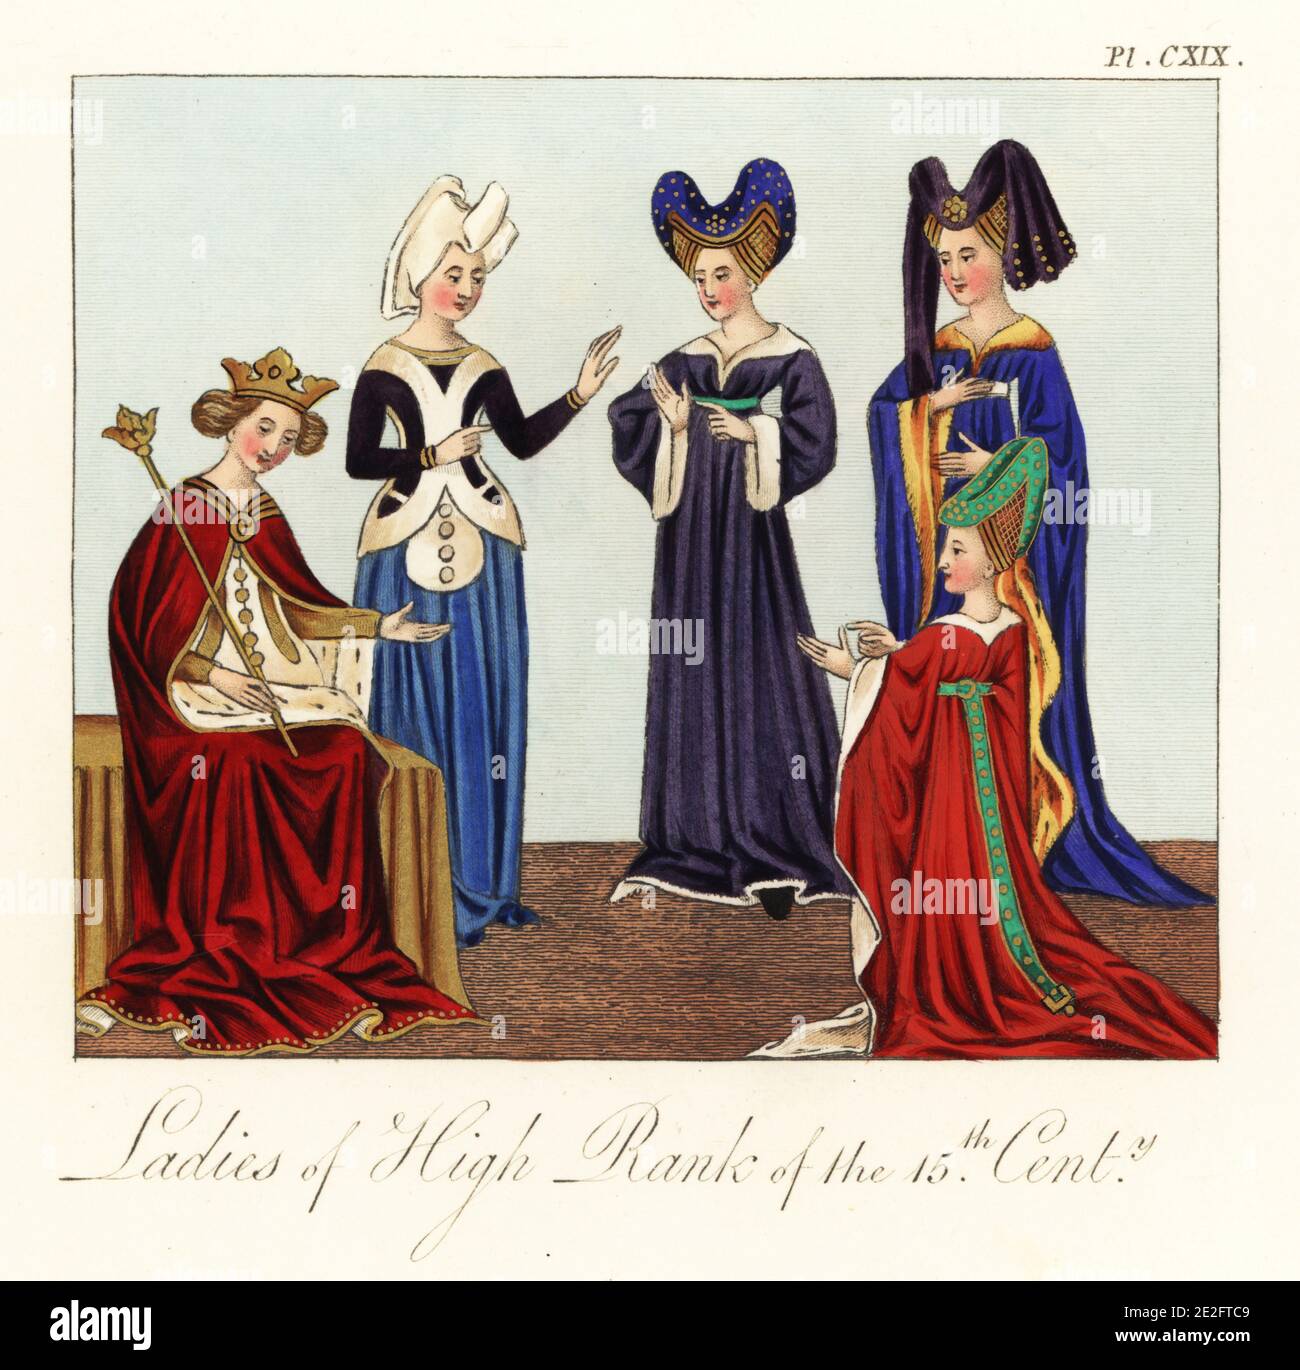 Margaret of Anjou, Queen of Henry VI of England, in ermine mantle with crown and sceptre, and noblewomen courtiers in butterfly hennin or escoffion headwear and wide-sleeved robes, 15th century. Marguerite from f.2v, dedicatory verses, and ladies from f.403r, Alain Chartier, Breviaire des nobles, of the Talbot Shrewsbury Book, Royal MS 15 E vi, British Library. Handcoloured engraving by Joseph Strutt from his Complete View of the Dress and Habits of the People of England, Henry Bohn, London, 1842. Stock Photo